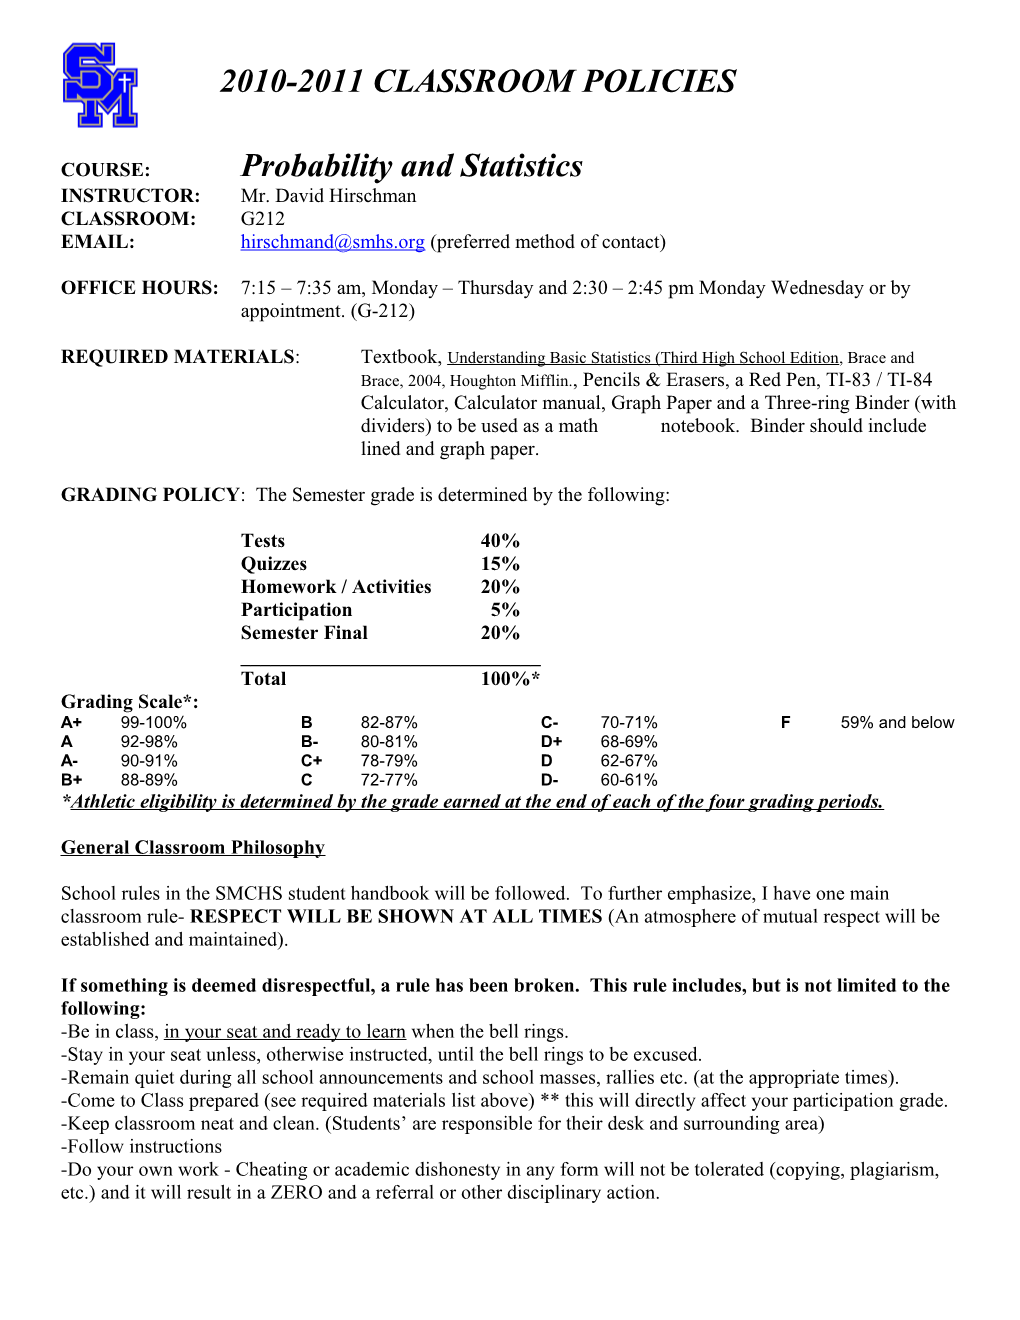 Course:Probability and Statistics